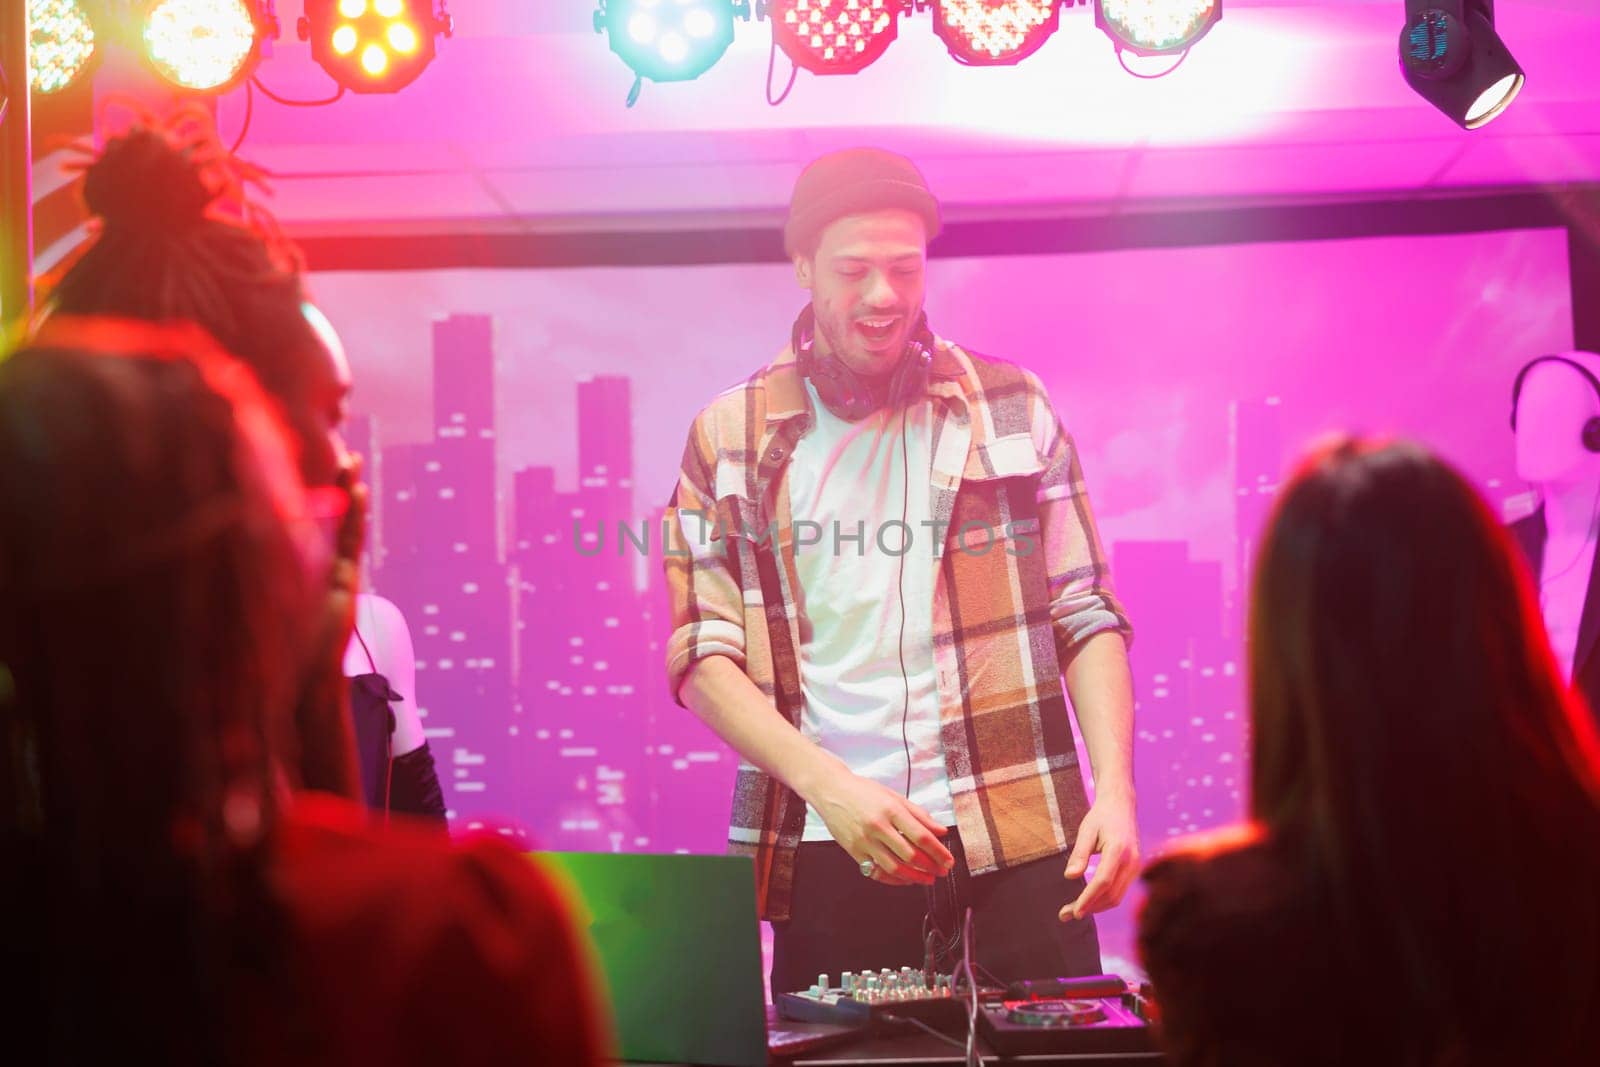 Dj on stage controlling music while crowd partying and dancing in nightclub. Man musician mixing sound on console while performing at live concert in club with spotlights